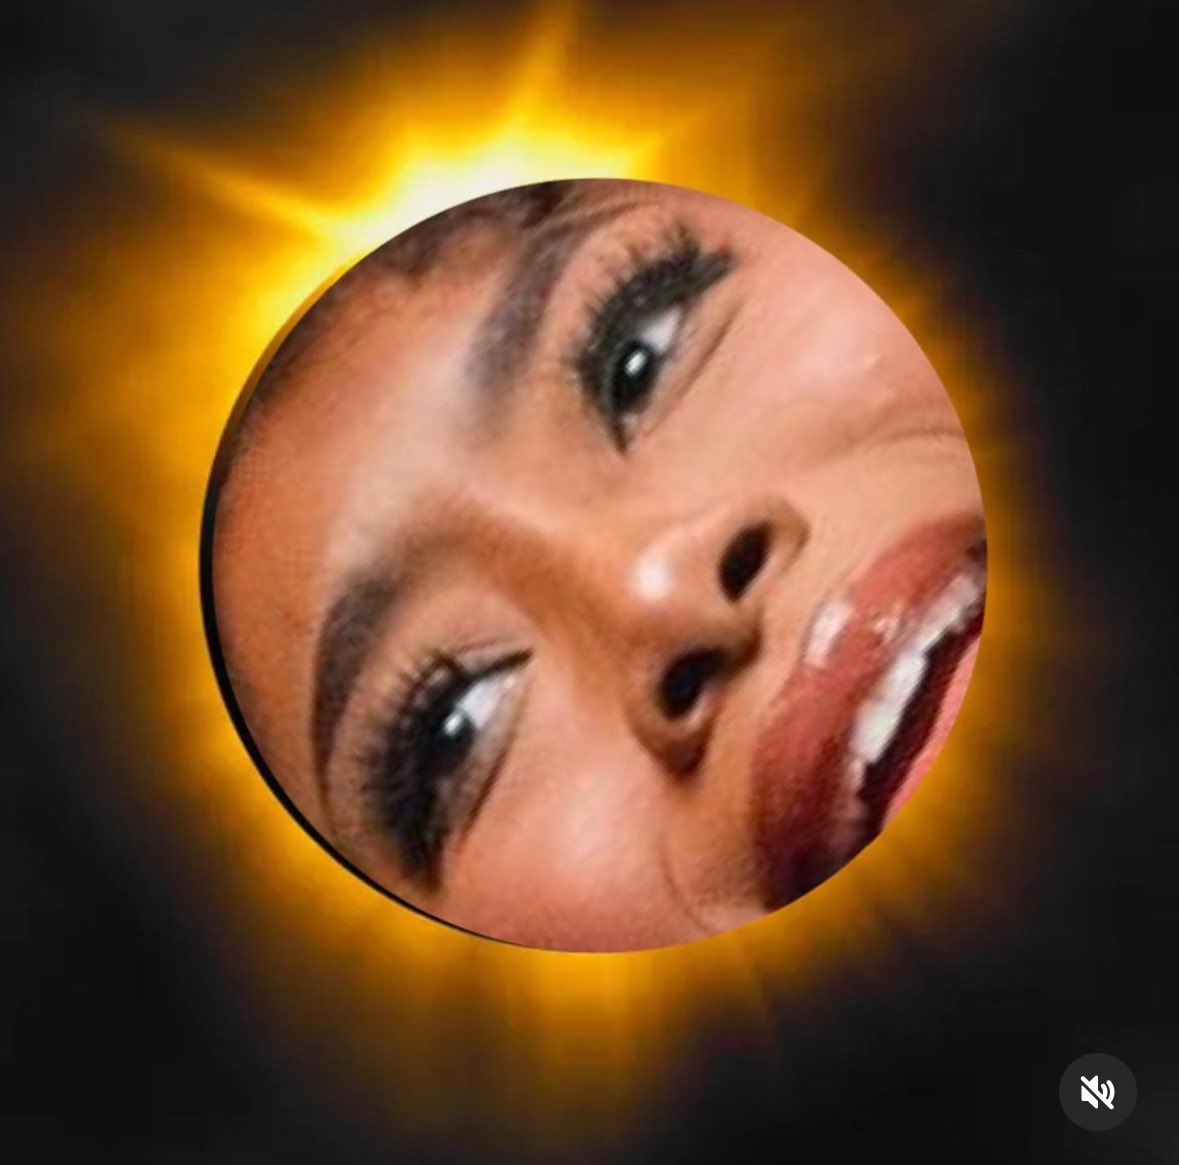 Can’t wait for the eclipse today @leah_sampson1